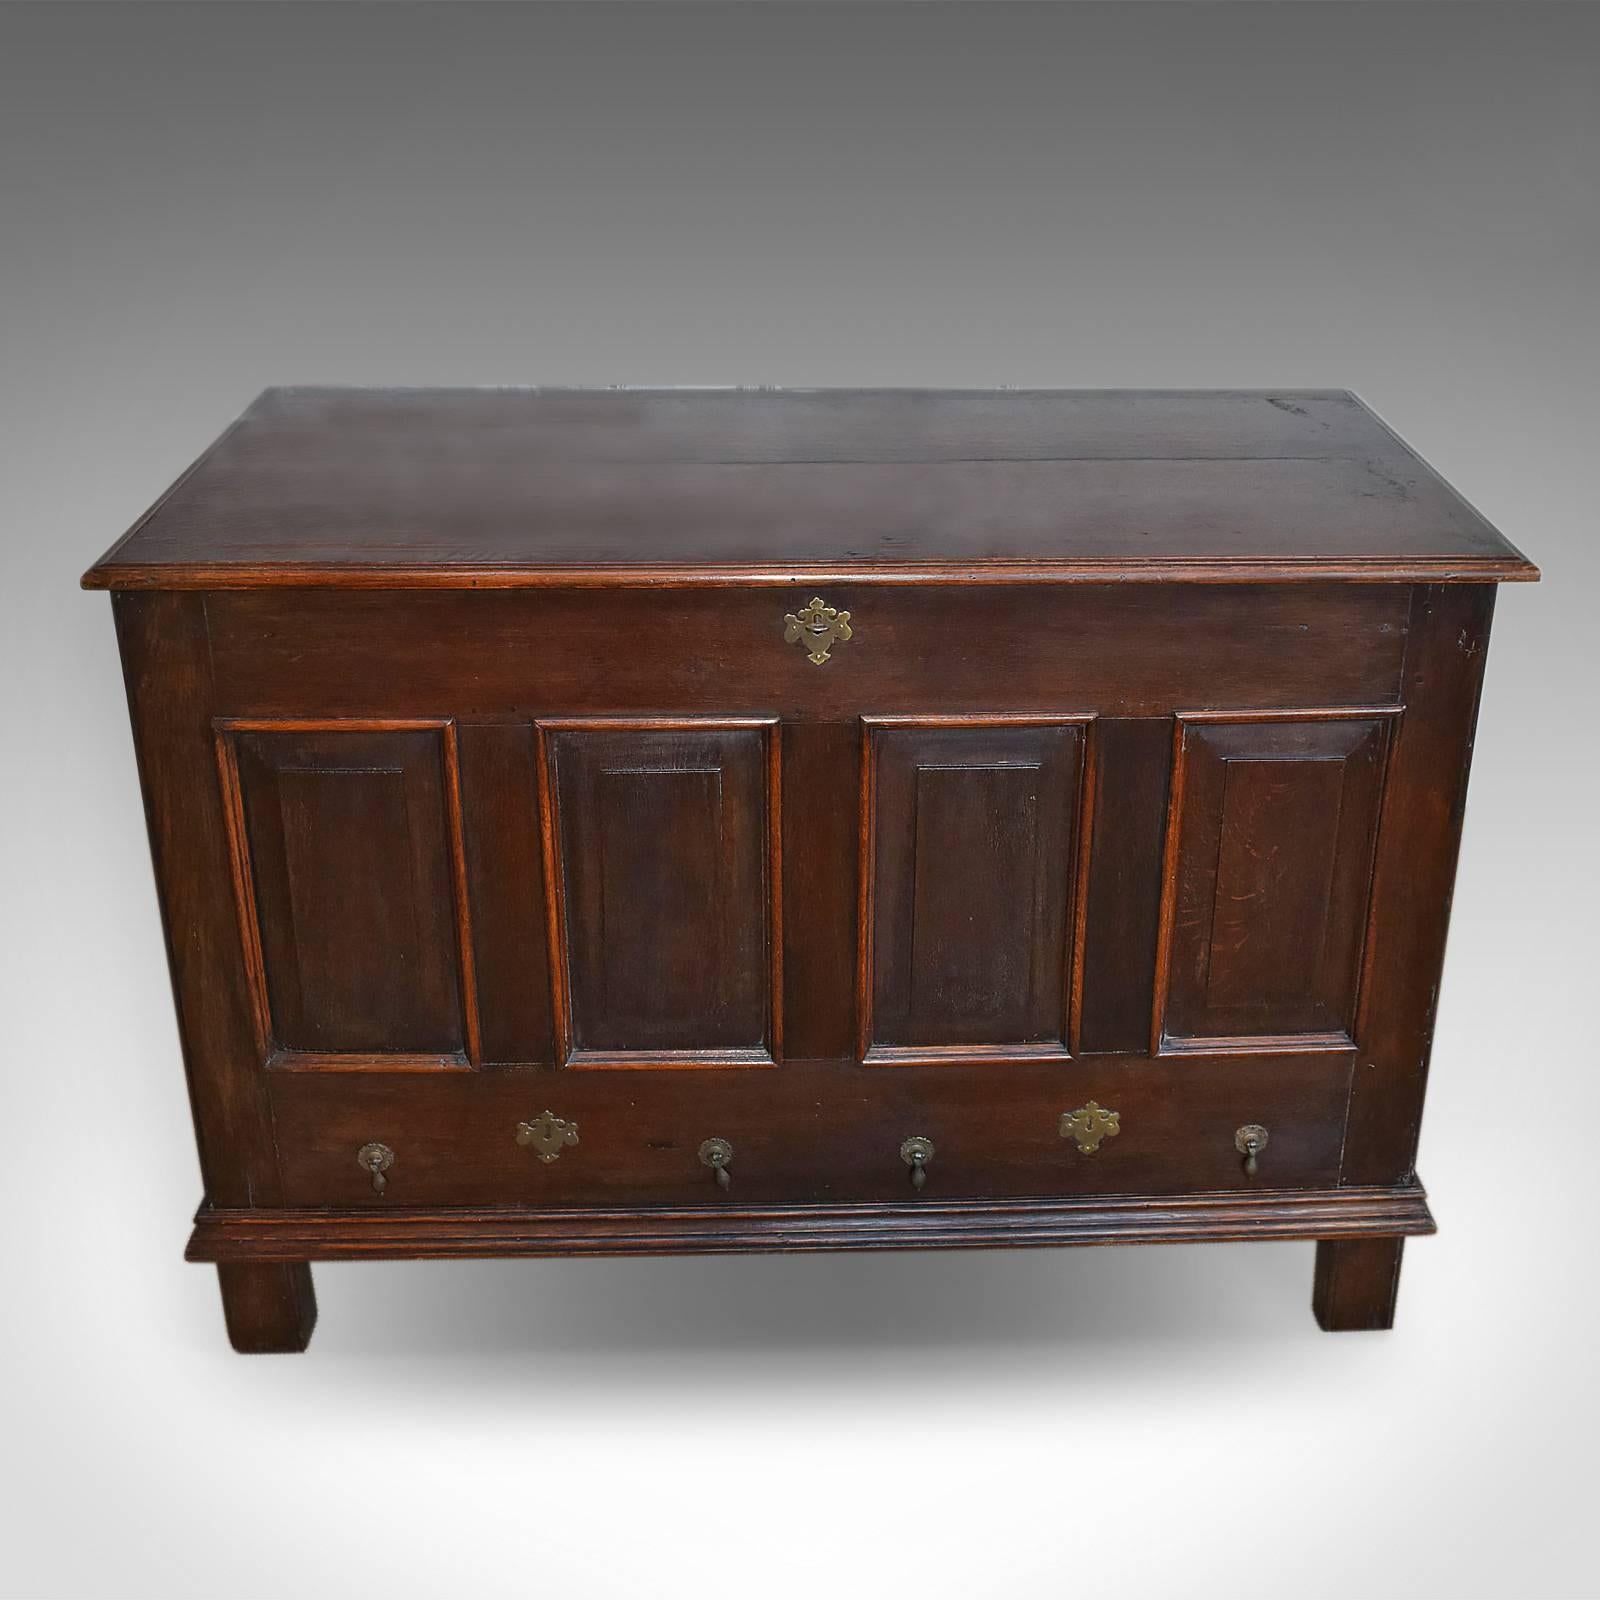 This is an antique mule chest, an English, oak trunk dating to the late Georgian period circa 1800.

English oak with an aged patina
Four chamfered field panel front with two panel sides
Faux drawer fronts with brass drop handles and lock